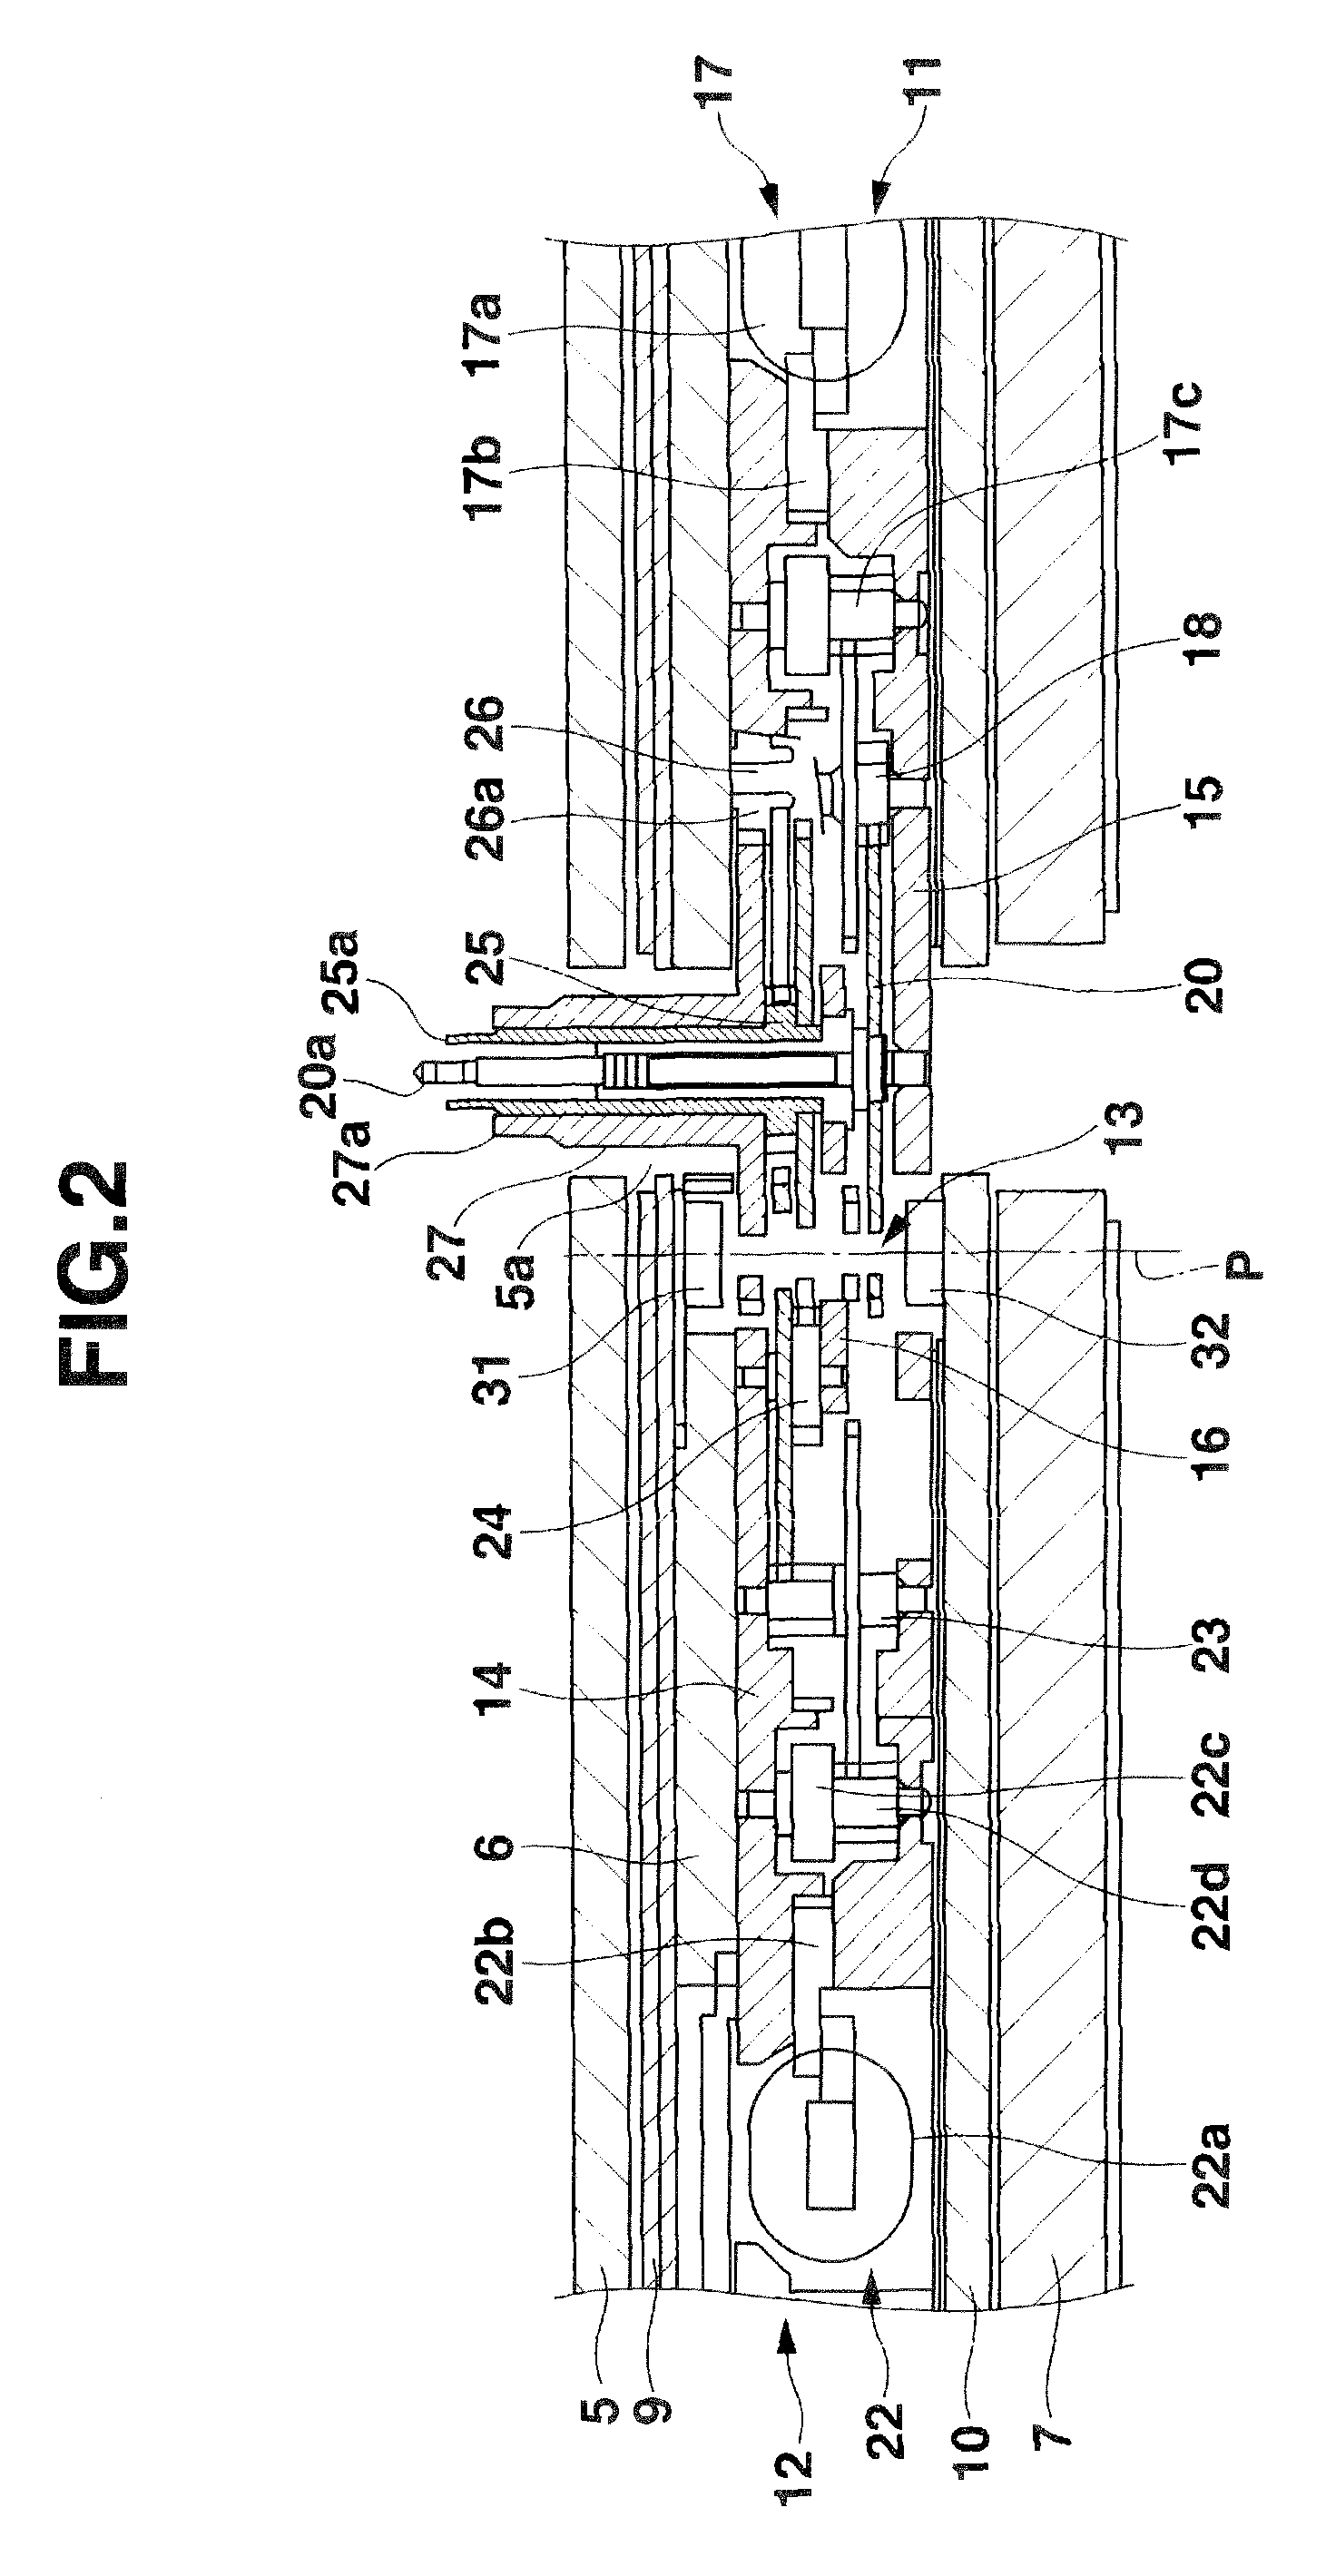 Hand position detecting device and method